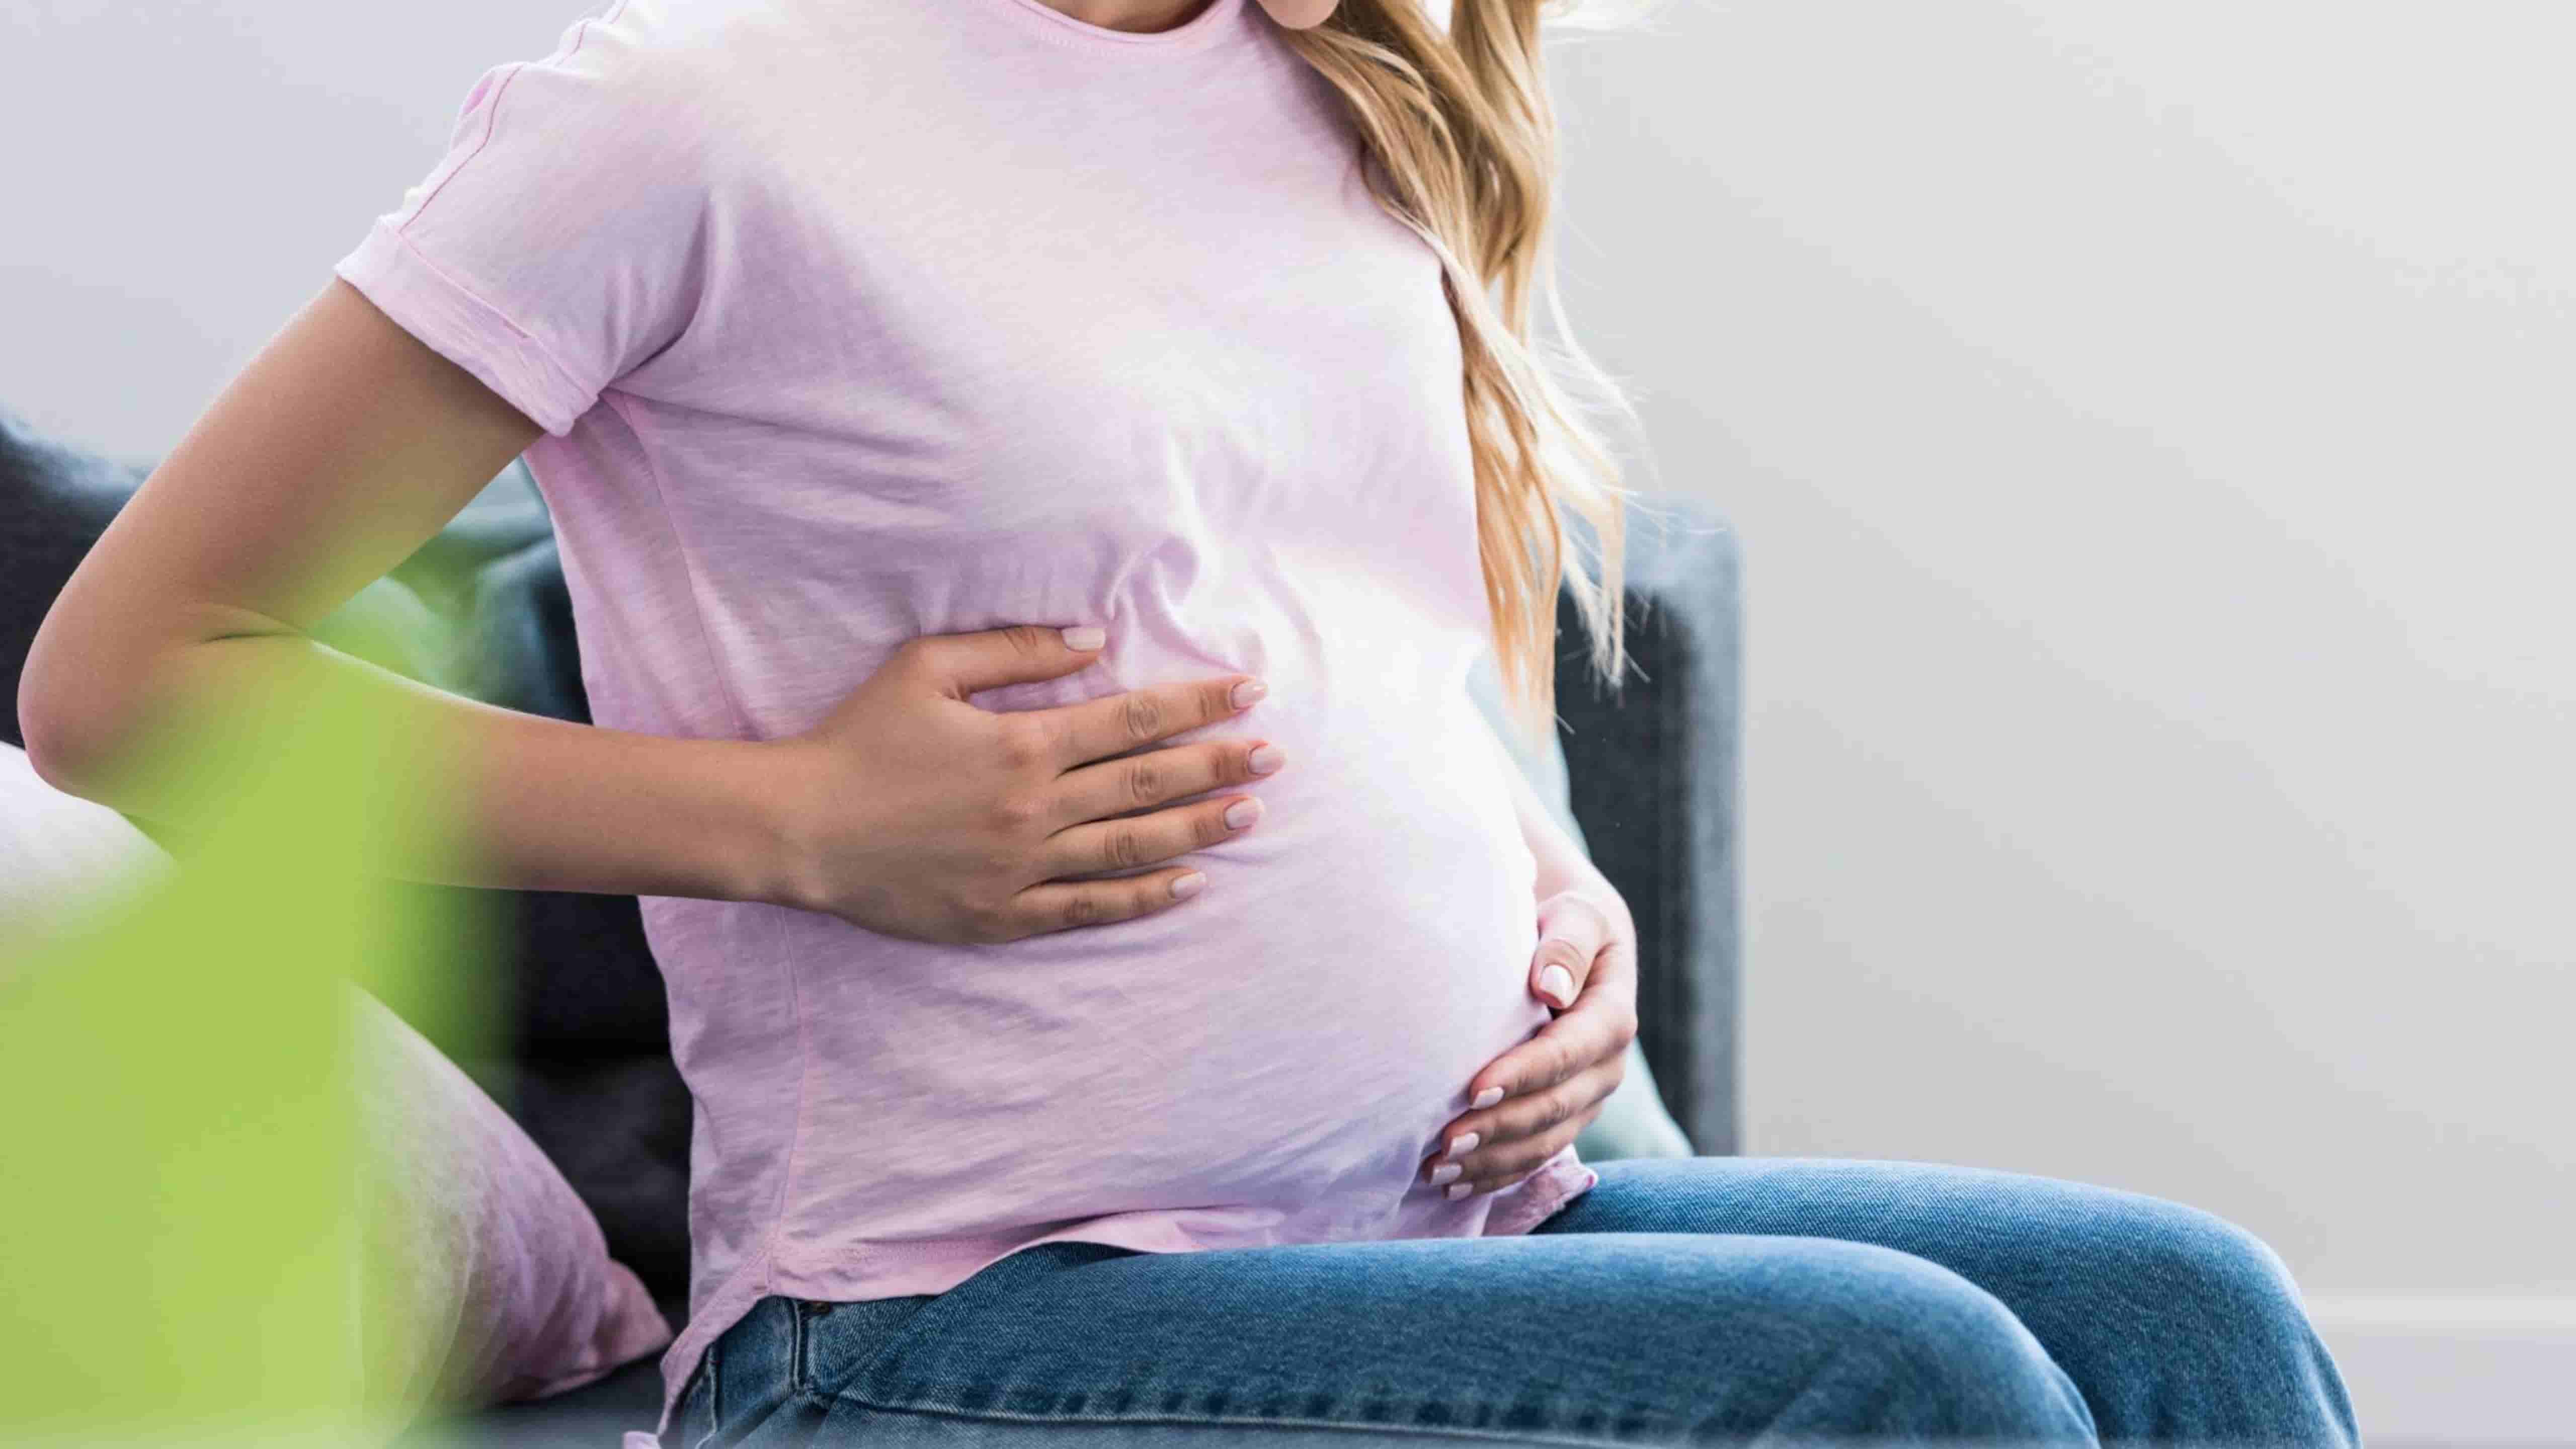 How to Distinguish Between Normal and Pregnancy-Related Post-Period Cramps